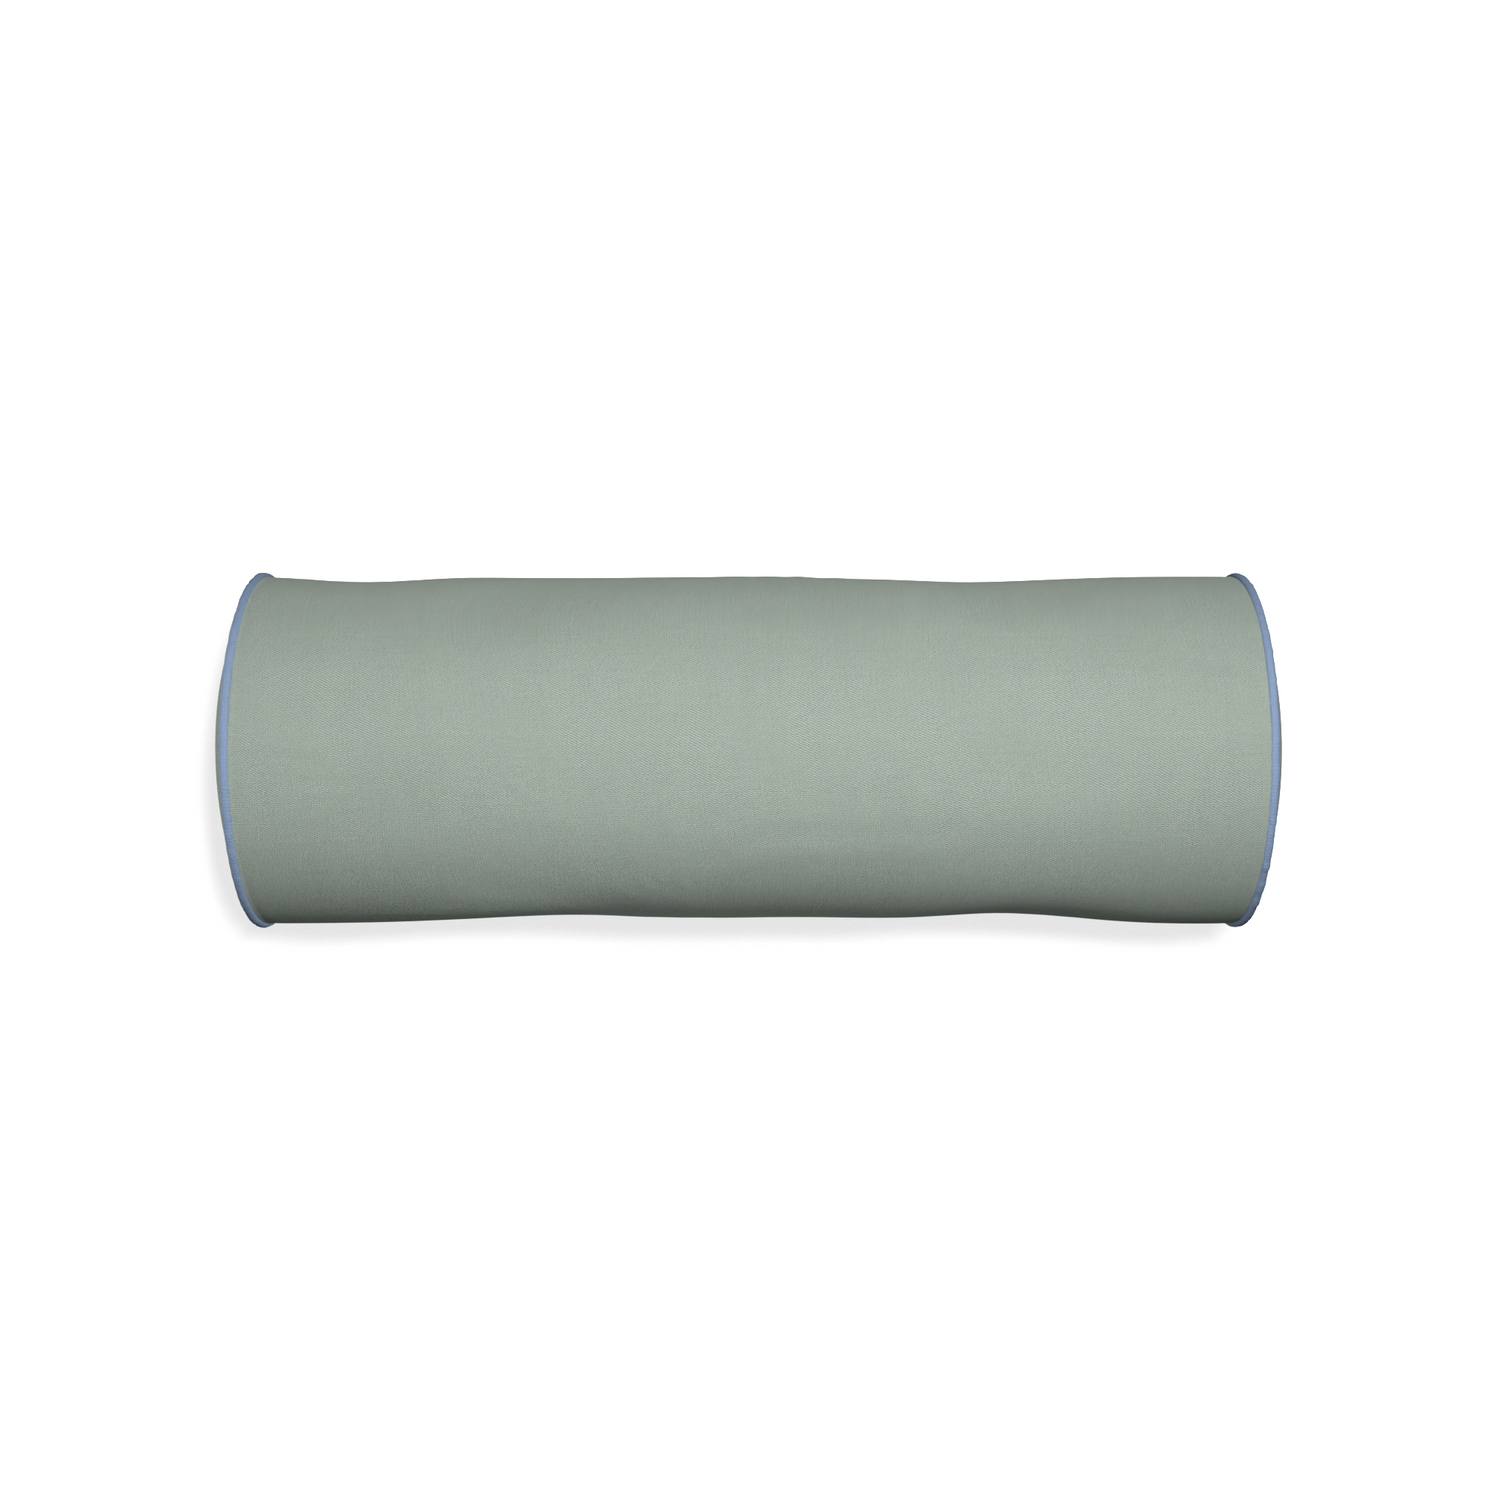 Bolster sage custom sage green cottonpillow with sky piping on white background